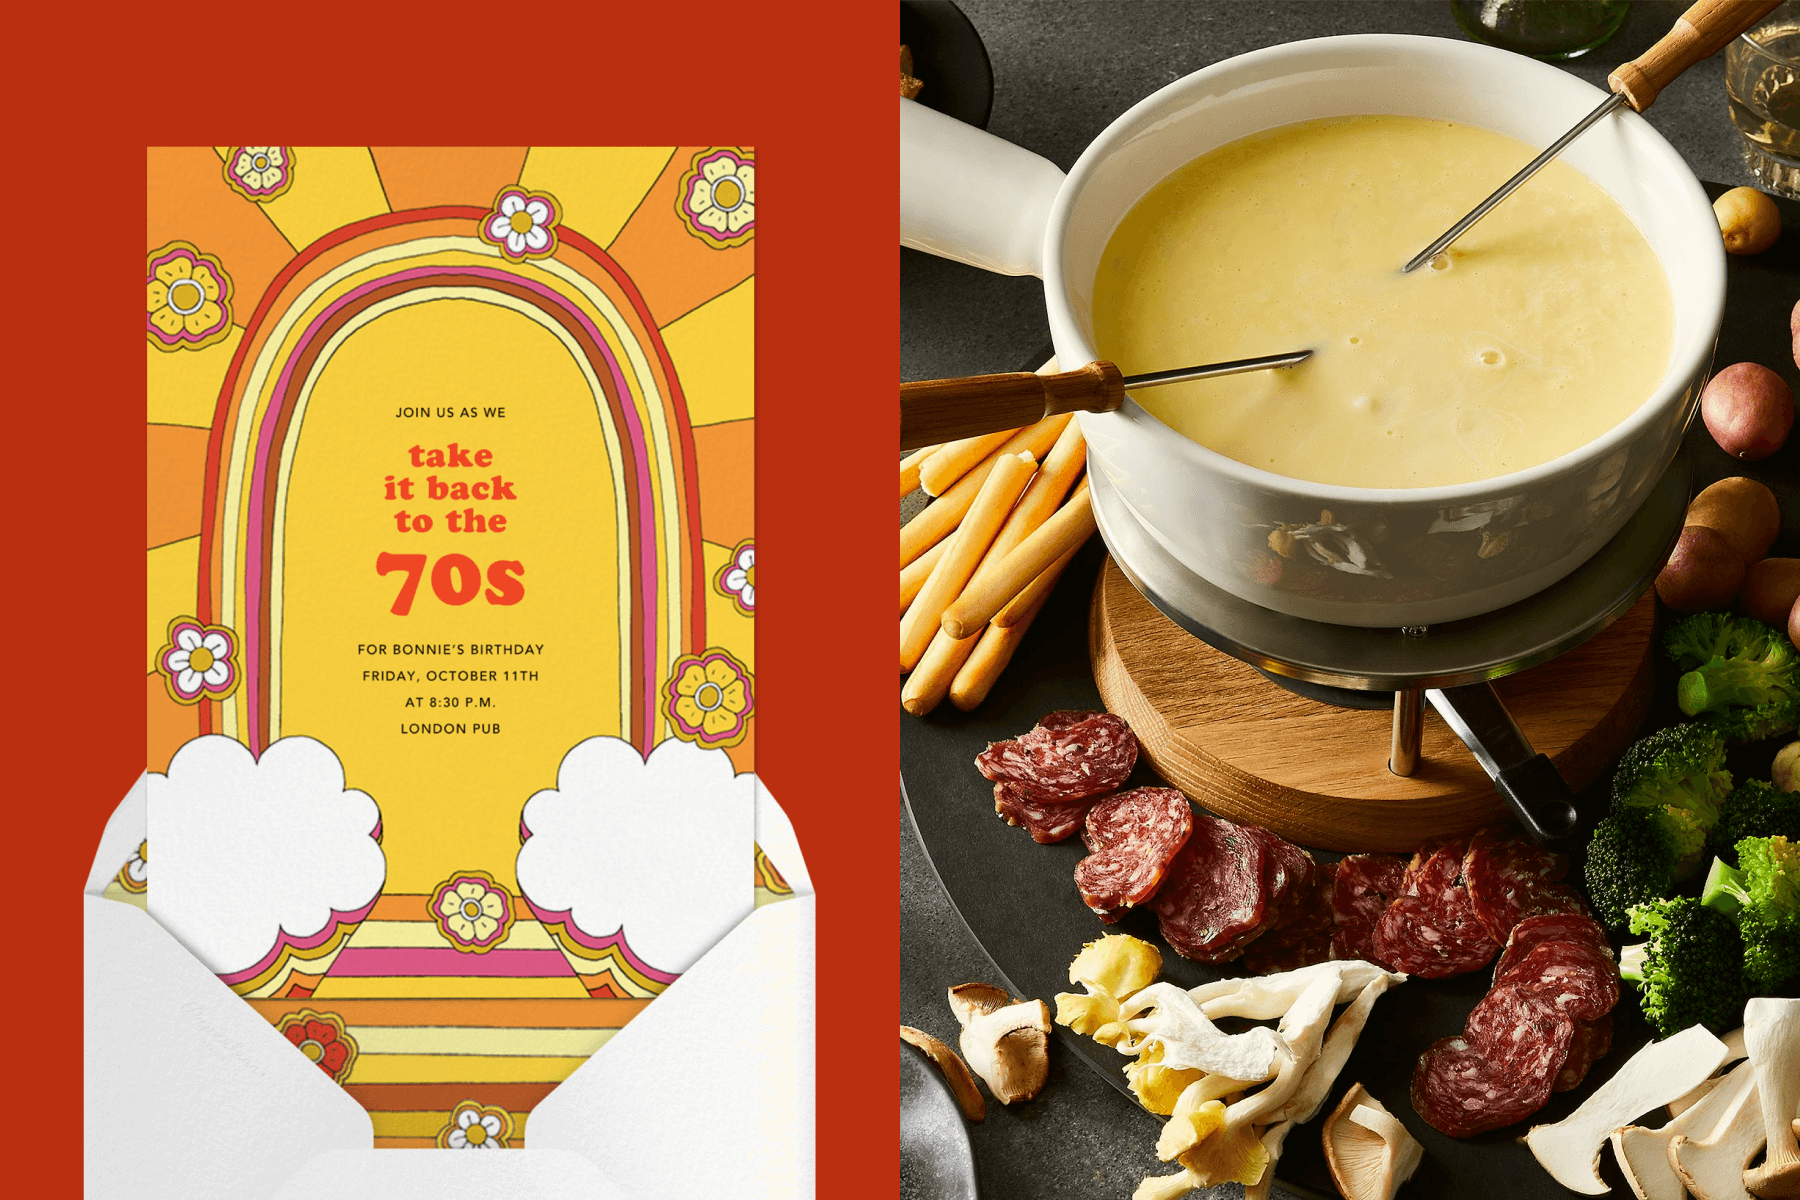 left: A party invitation with ’70s-style pop illustration in bright sunshine colors. Right: Cheese fondue.